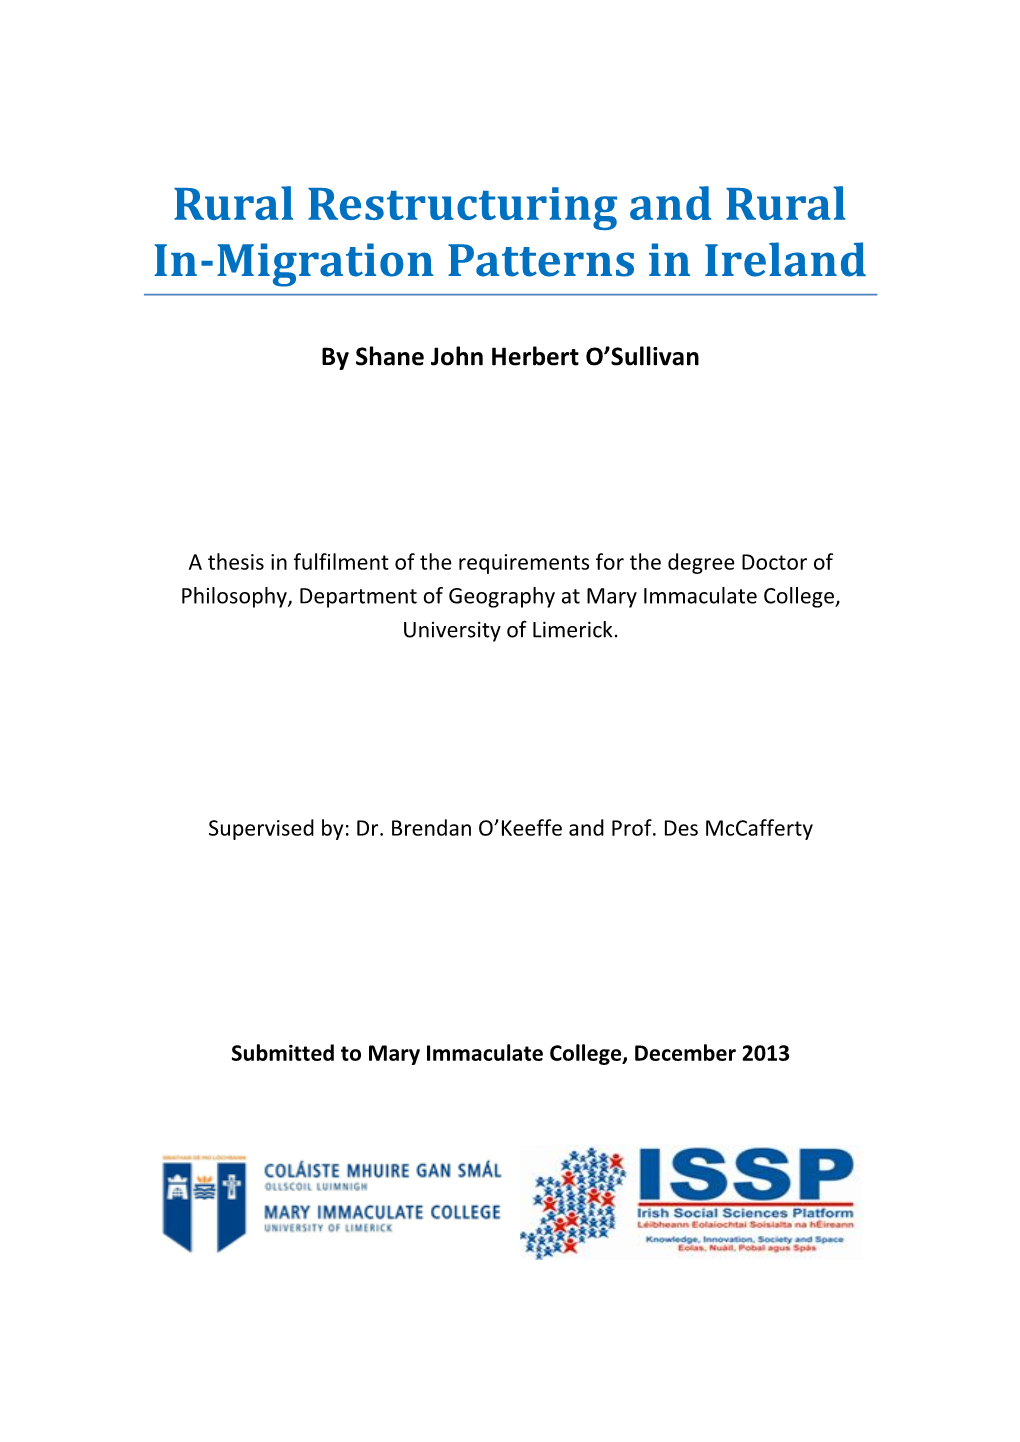 Rural Restructuring and Rural In-Migration Patterns in Ireland